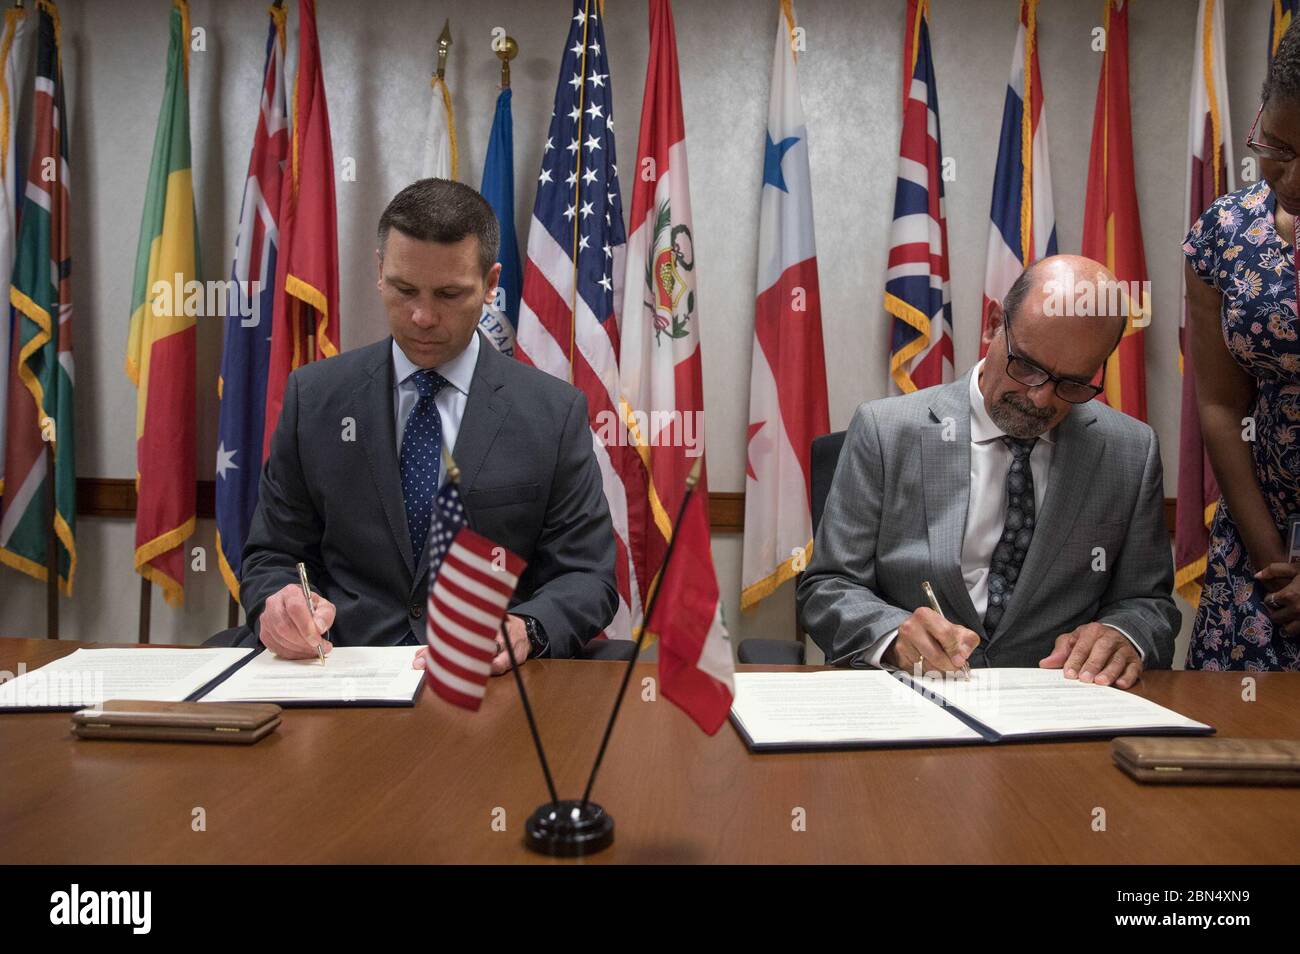 U.S. Customs and Border Protection Commissioner Kevin K. McAleenan and Director General of the National Superintendence of Customs and Tax Administration of Peru Rafael Garcia sign a memorandum of understanding on cargo April 24, 2018. U.S. Customs and Border Protection Stock Photo